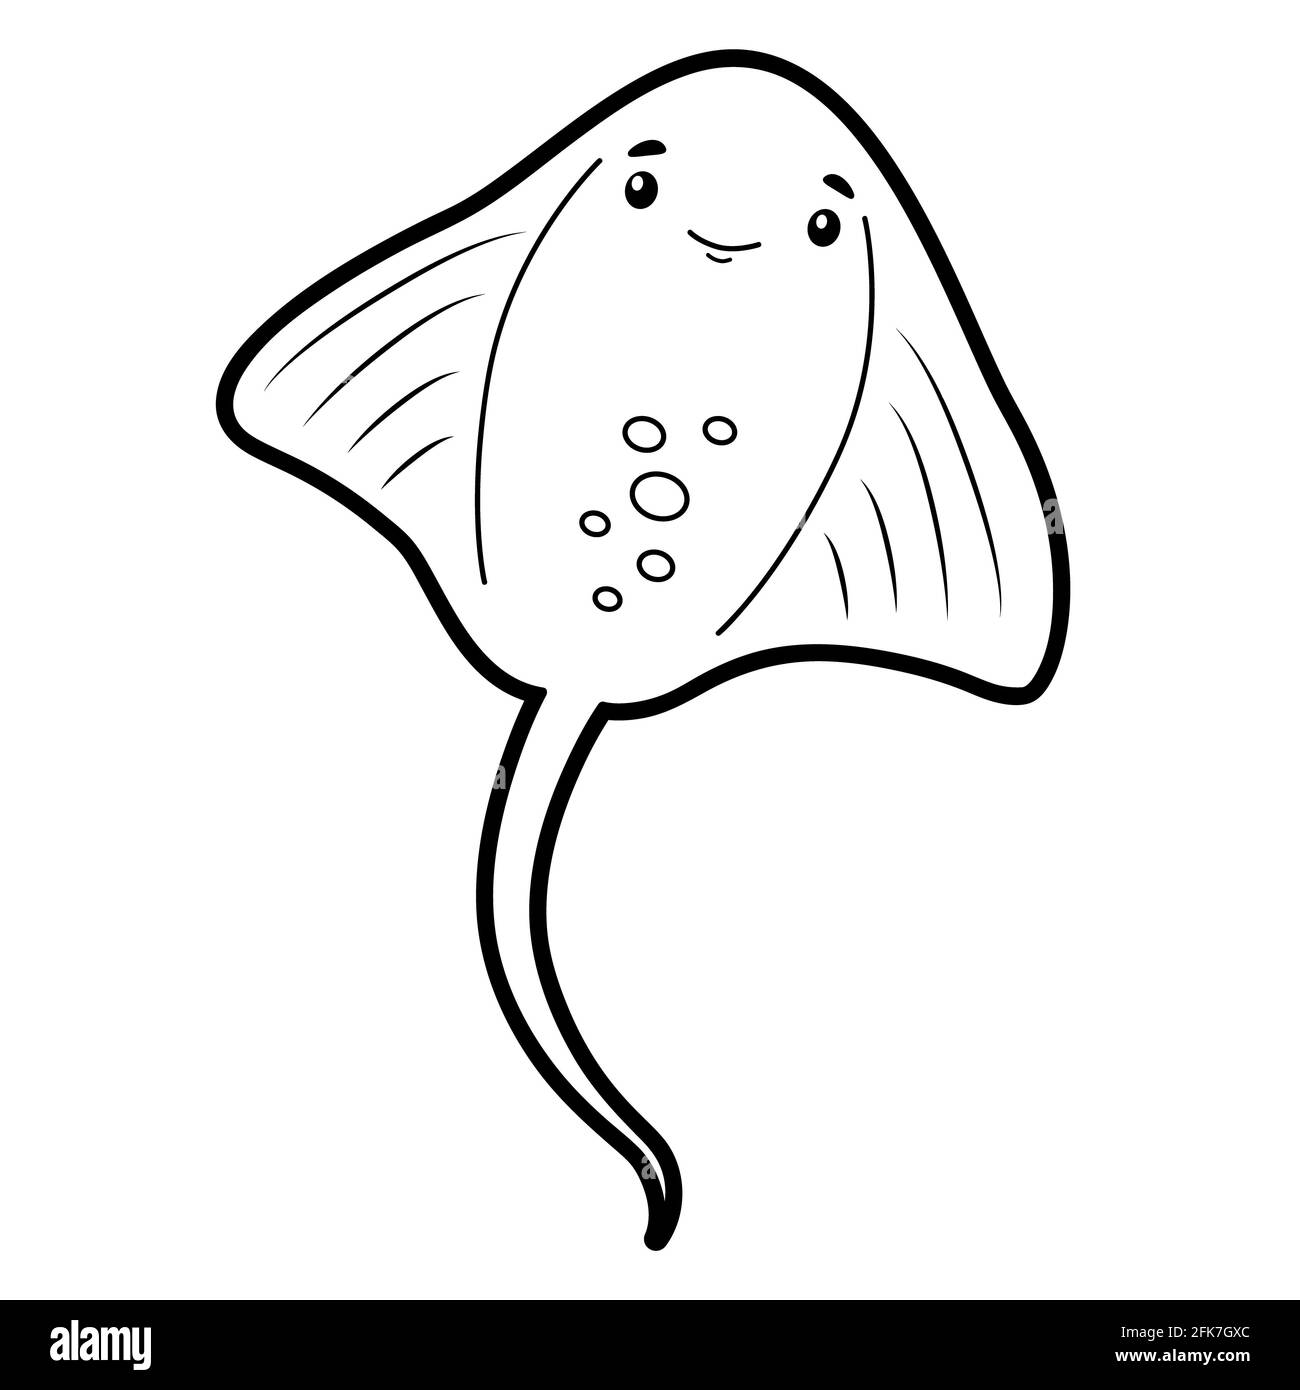 Coloring book or page for kids. cramp-fish black and white illustration Stock Photo